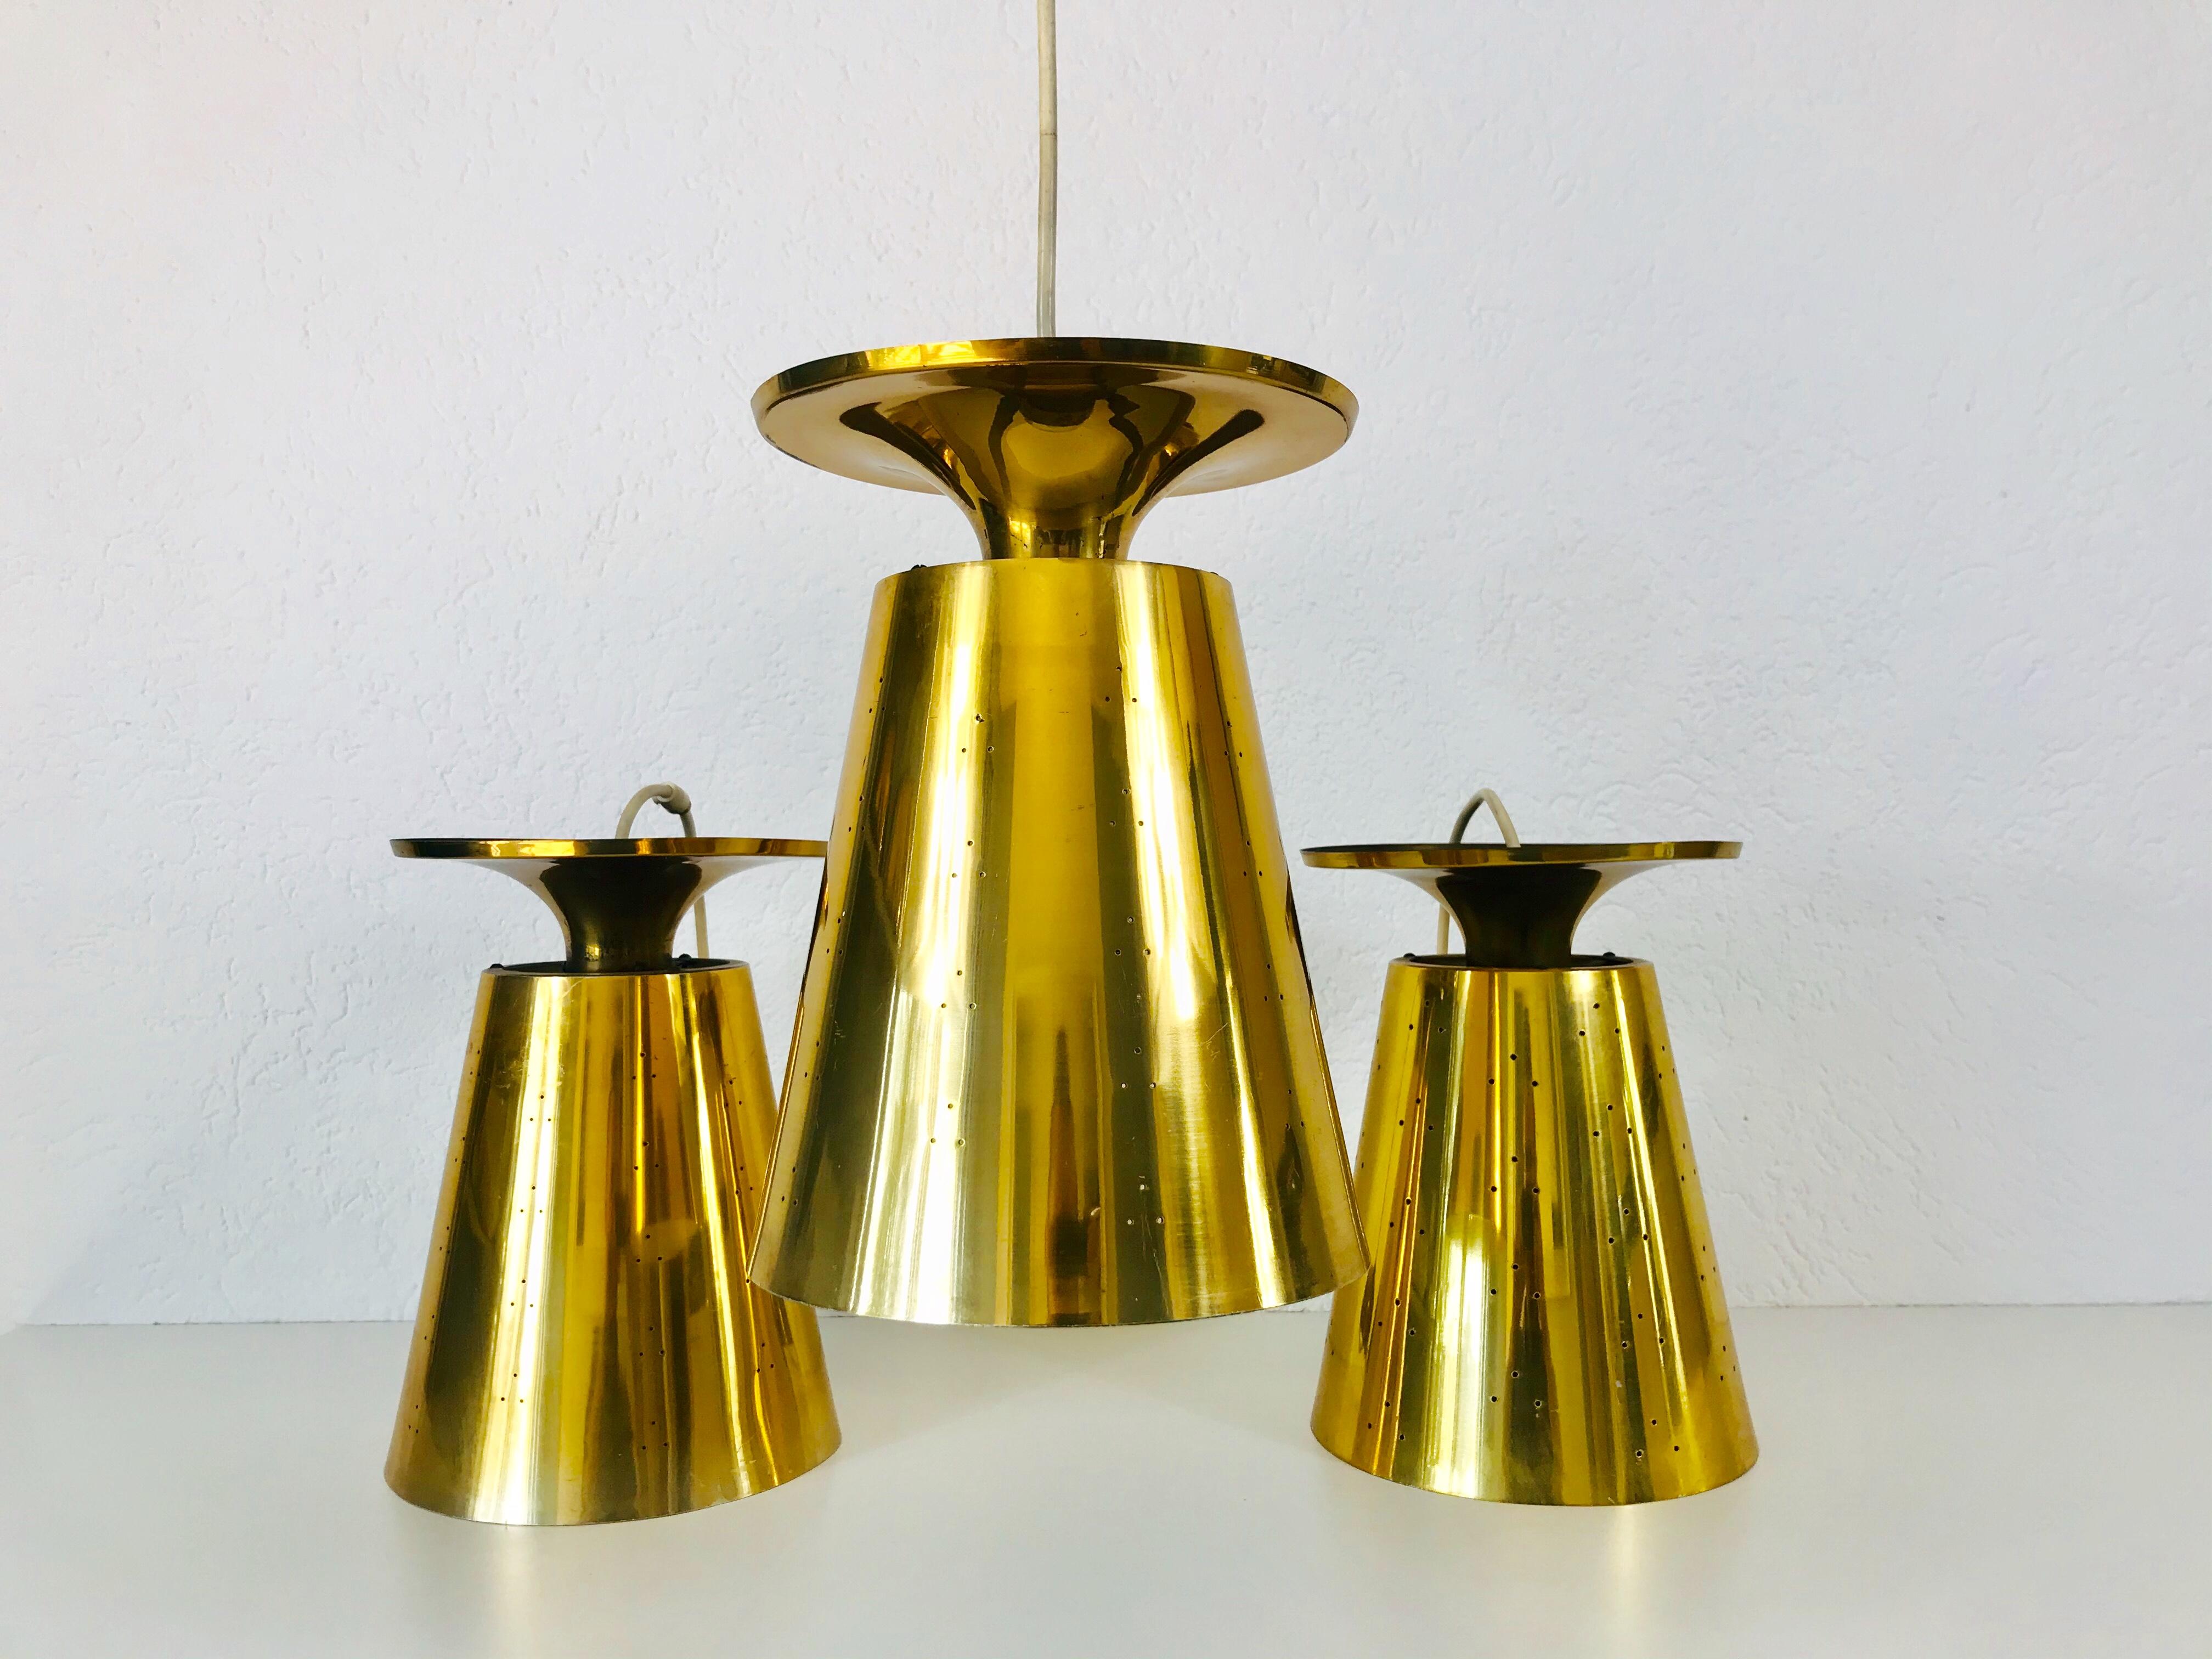 Set of three very rare pendant lamps made in Italy in the 1950s. The lighting is made of full of brass and is designed by the Italian brand Stilnovo. It has many small holes which are creating beautiful light. The lighting requires one E27 light